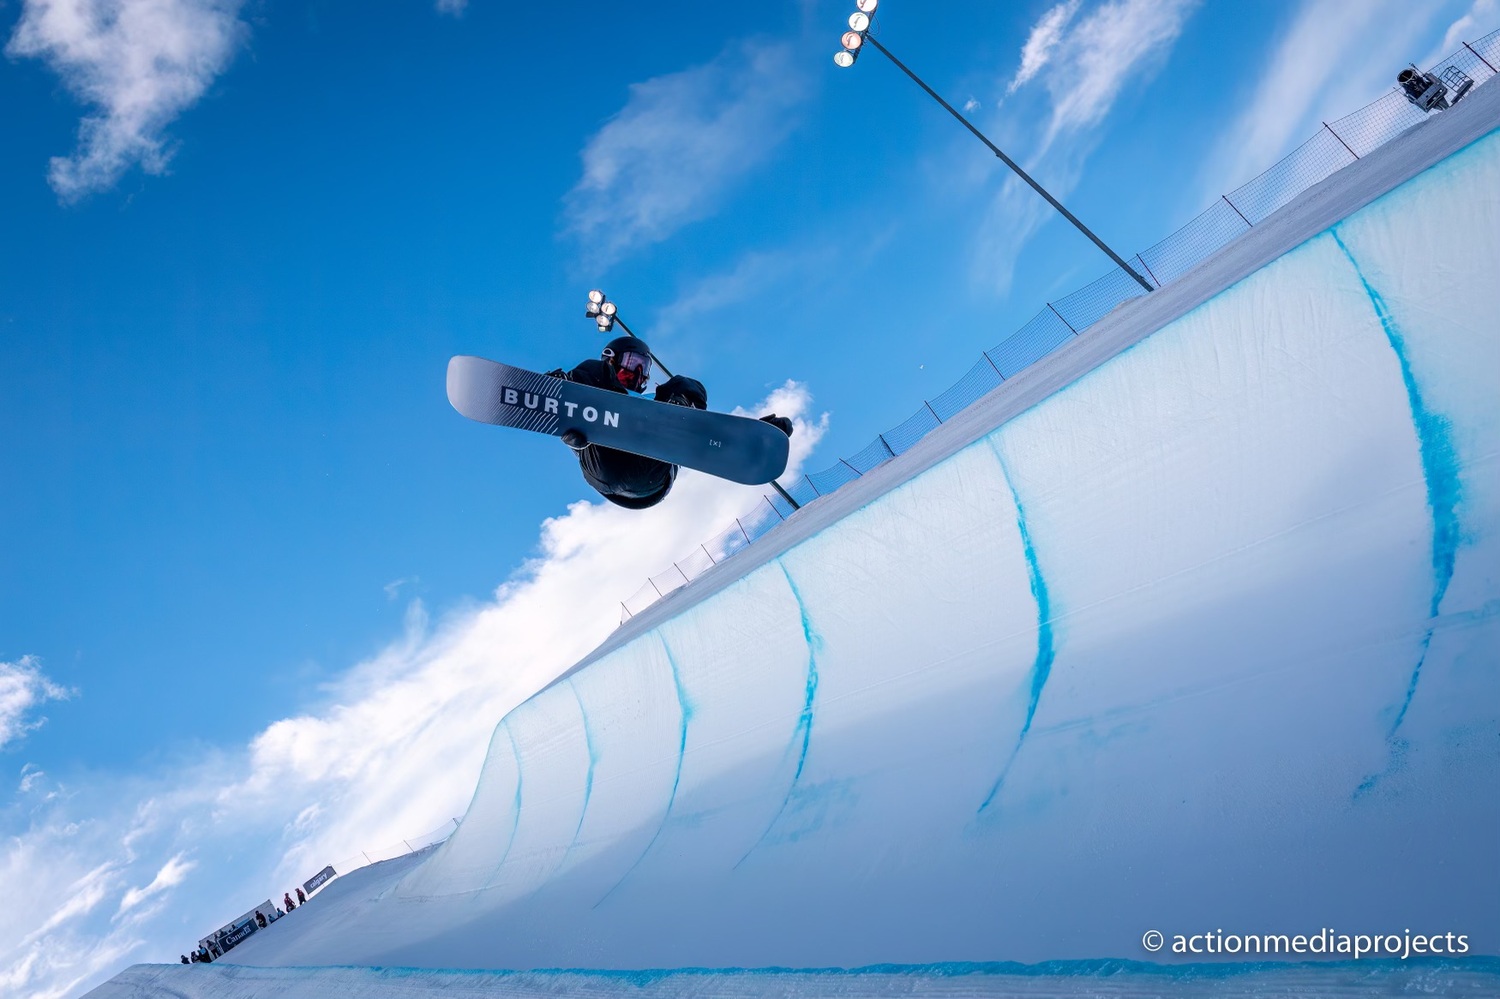 Montauk teen Noah Avallone will represent the U.S. at the 2024 Youth Olympics in South Korea as a member of the snowboard halfpipe team. ACTION MEDIA PROJECTS (ANTON VAN DER MERWE)